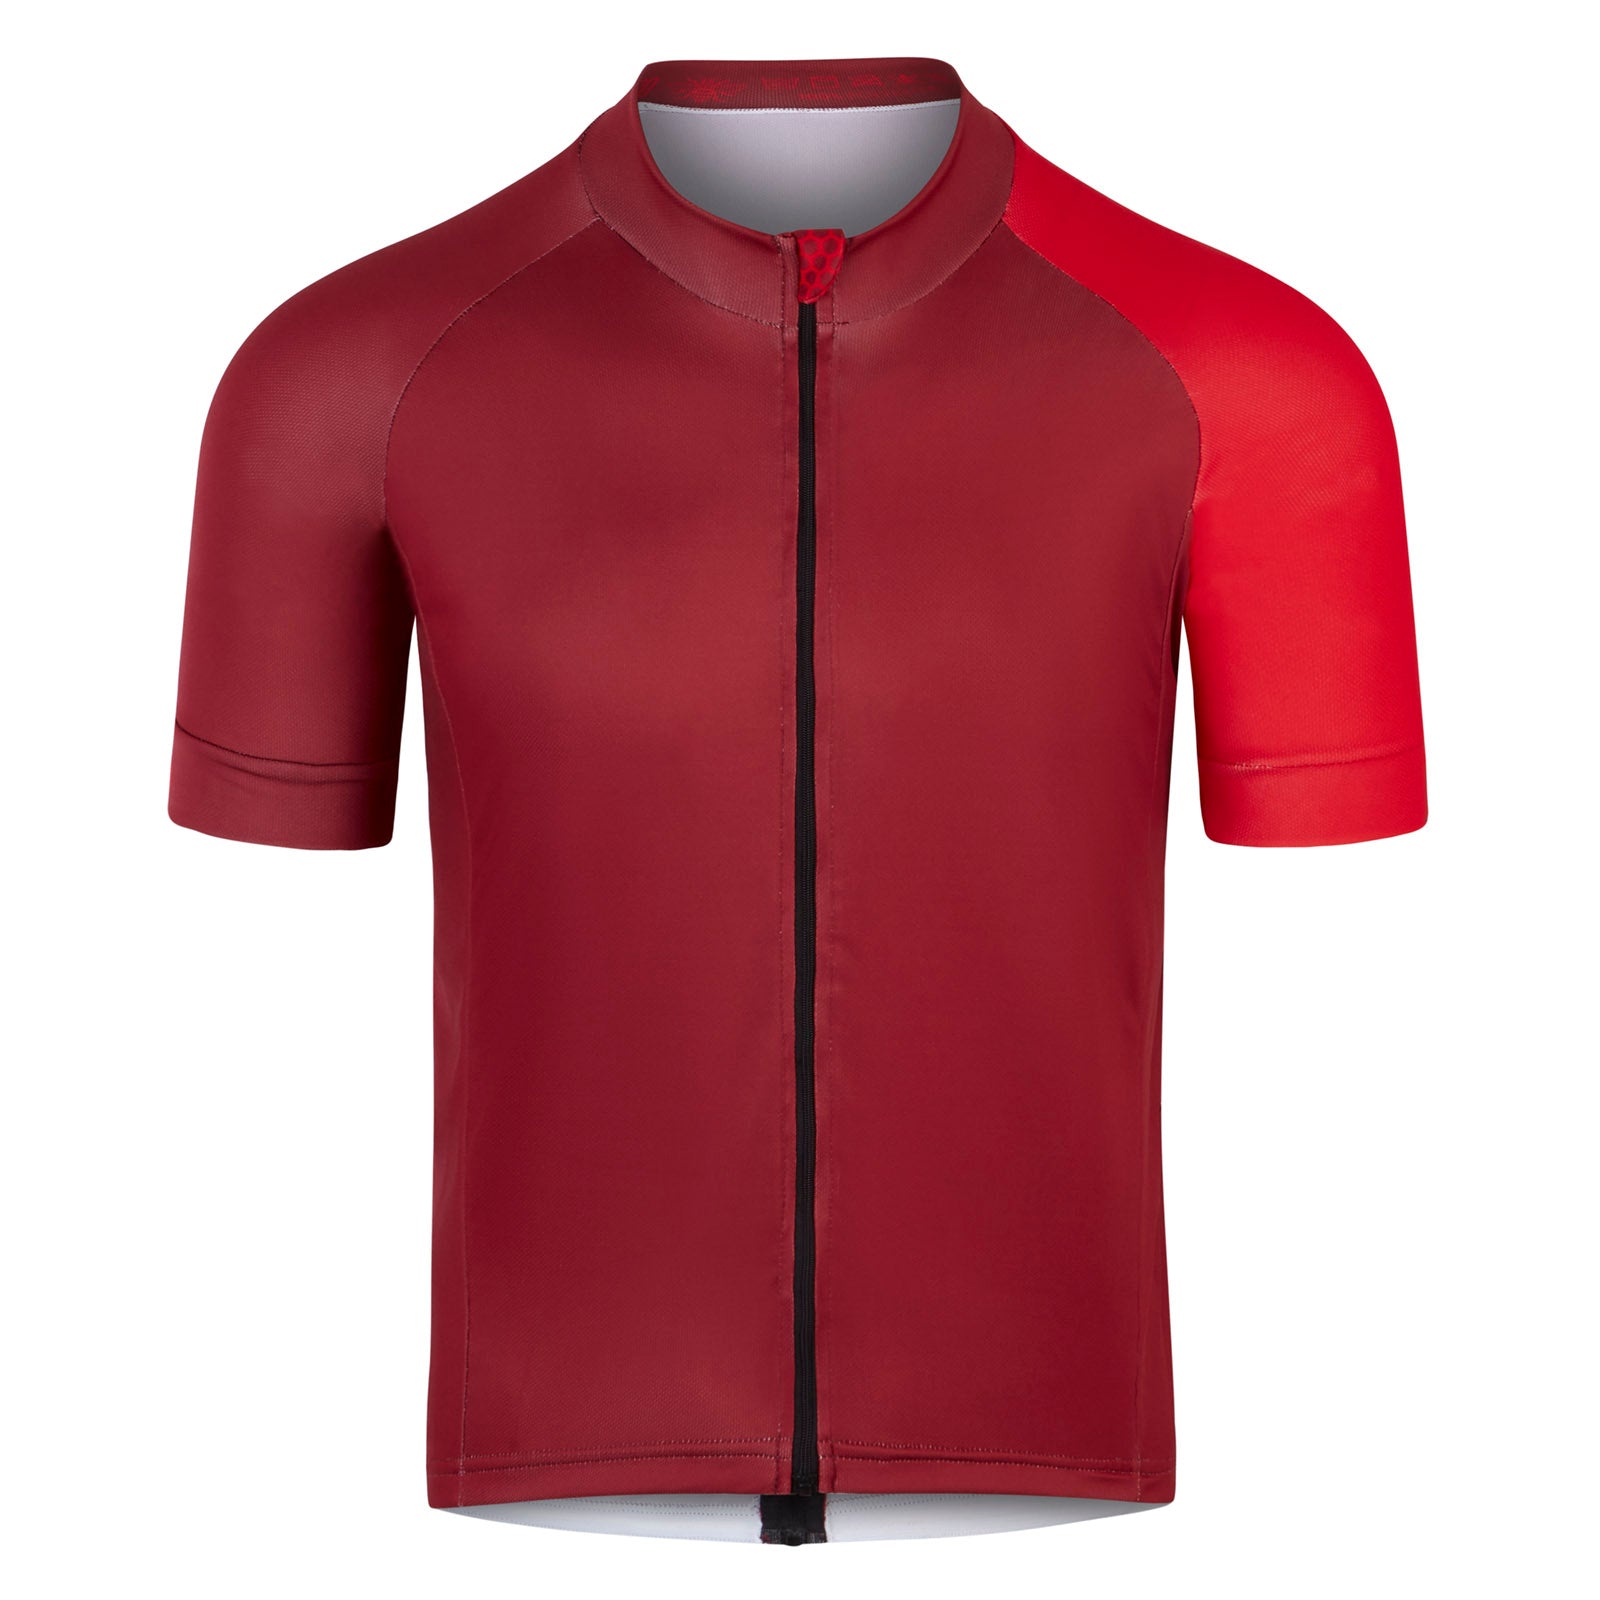 Primary Jersey - Lusso Cycle Wear